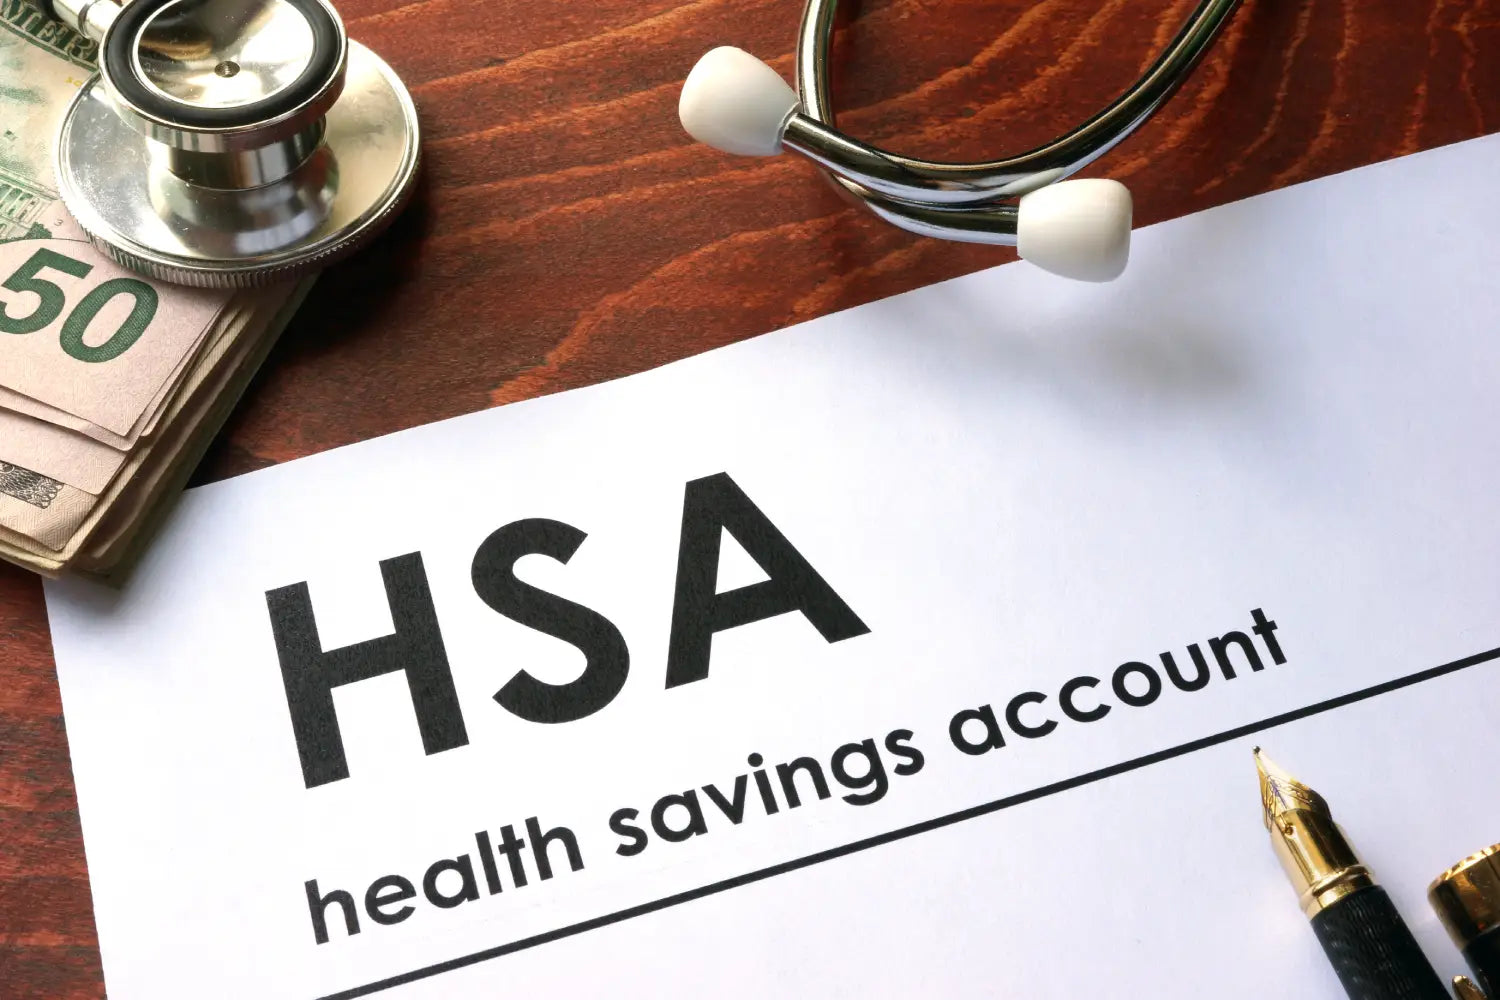 Maximize Your Health Benefits: Why You Should Use Your FSA/HSA Funds Before the Year Ends